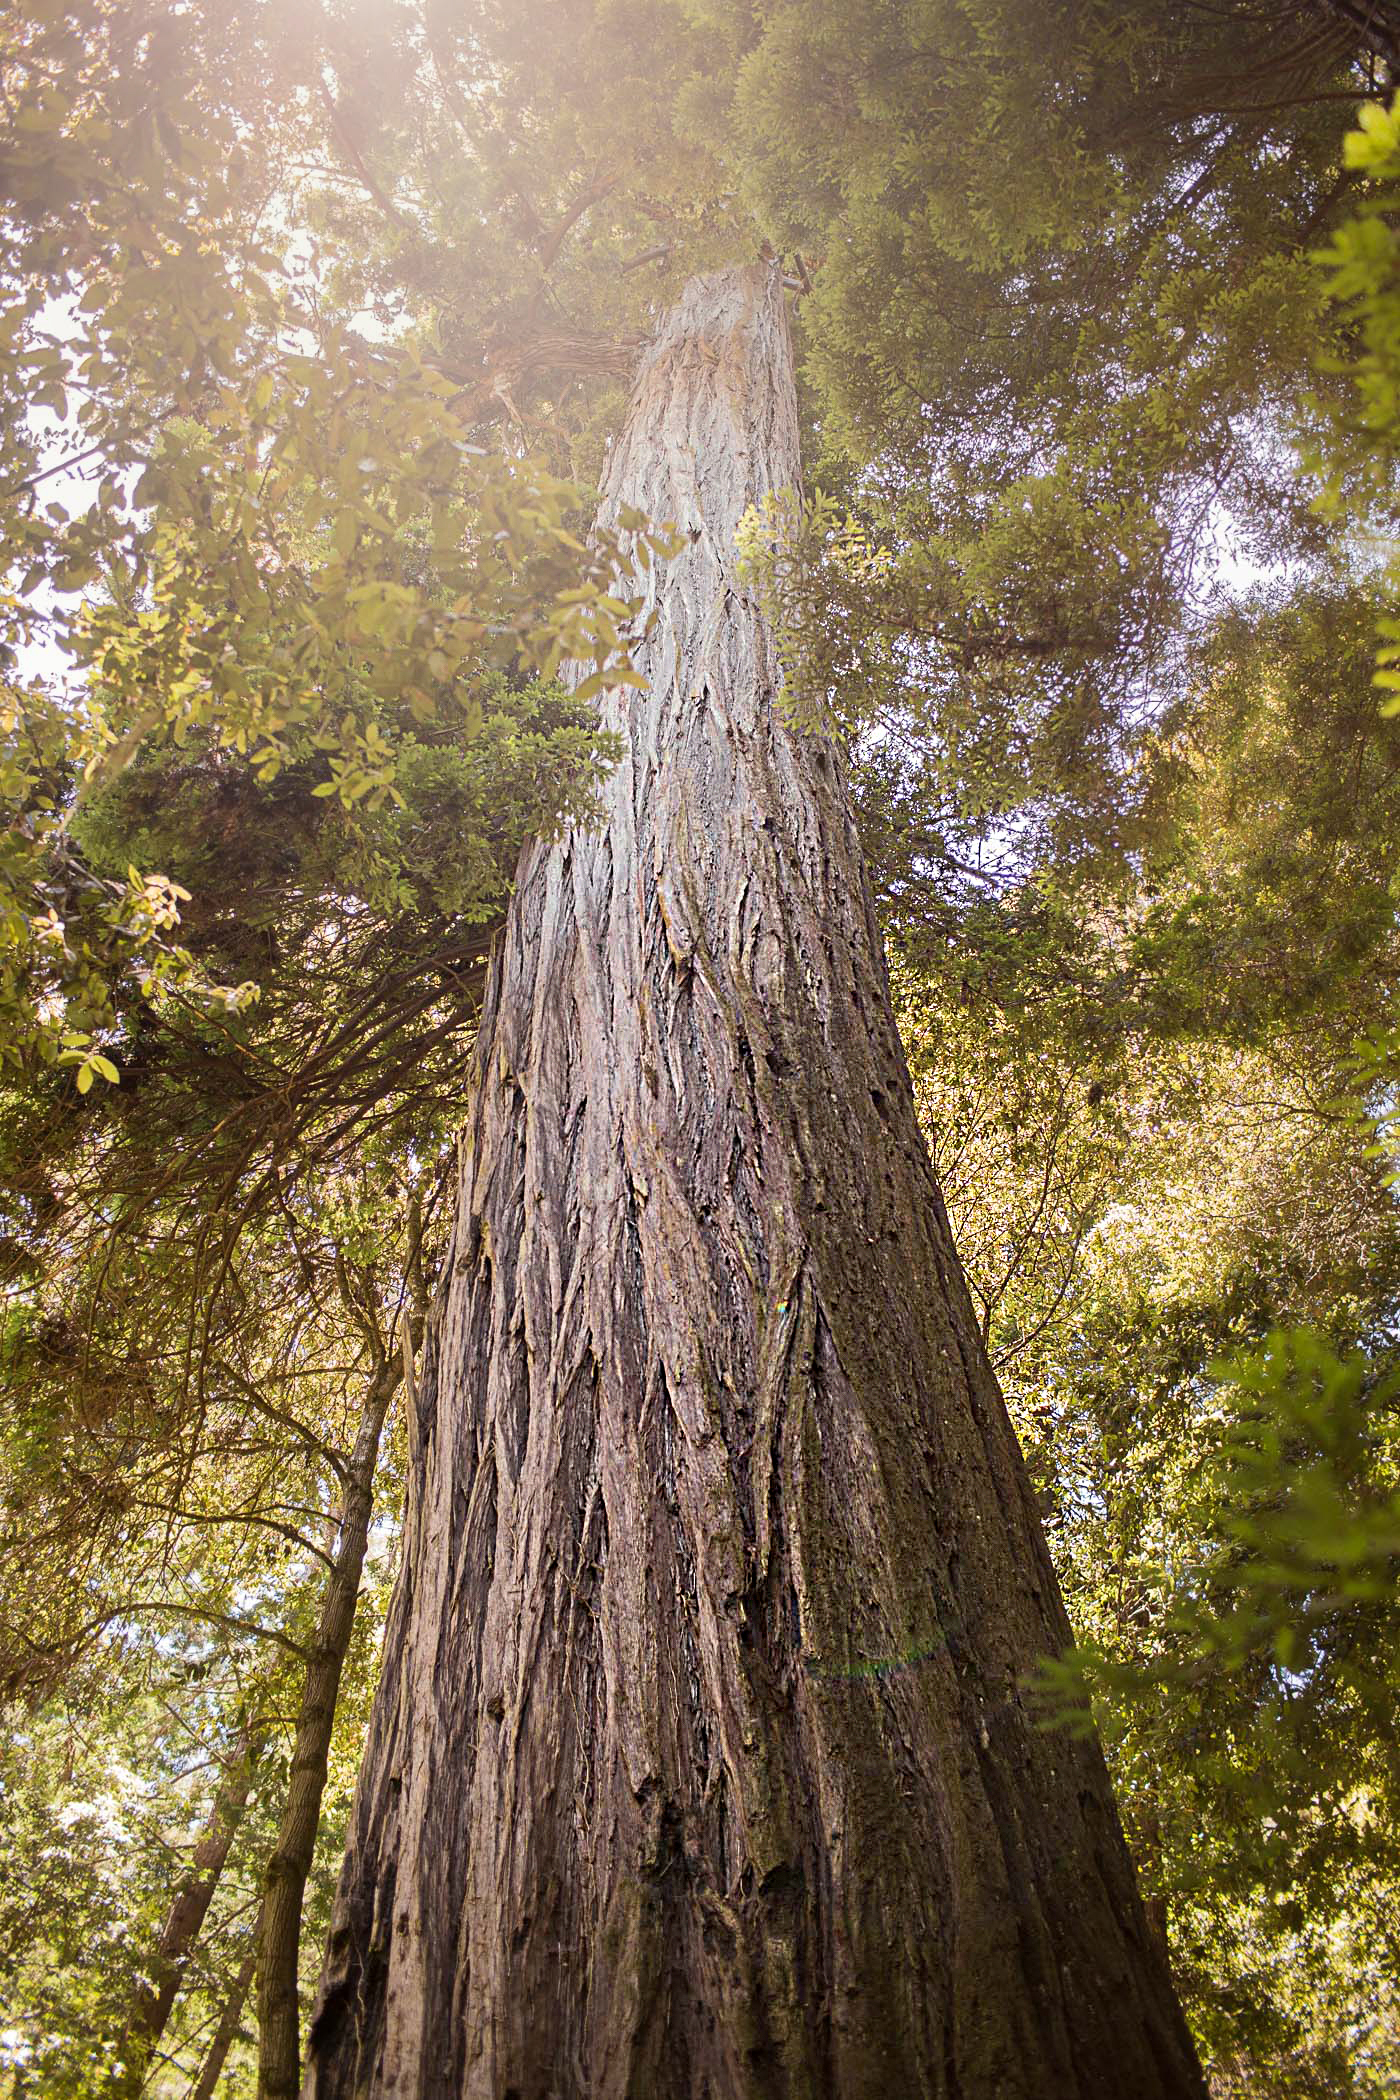 Forest of Nisene Marks Advocate Tree, 260 Feet Tall, over 1000 years old